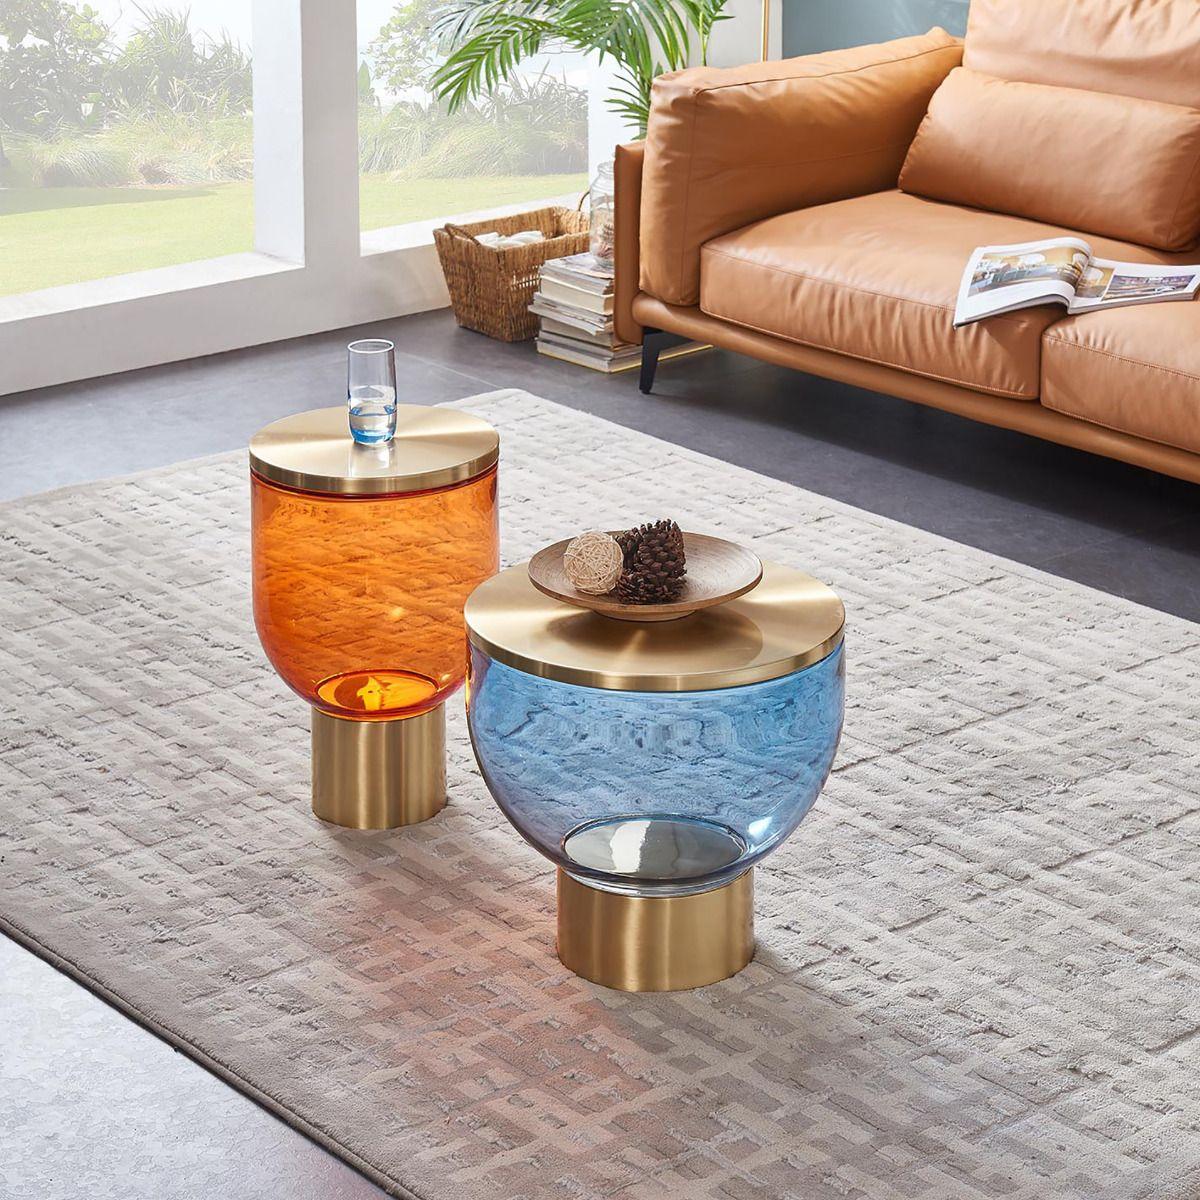 Contemporary Coffee Table and End Table Set CT-W9320-BLU / ET-W9320-ORG CT-W9320-BLU ET-W9320-ORG in Orange, Blue 